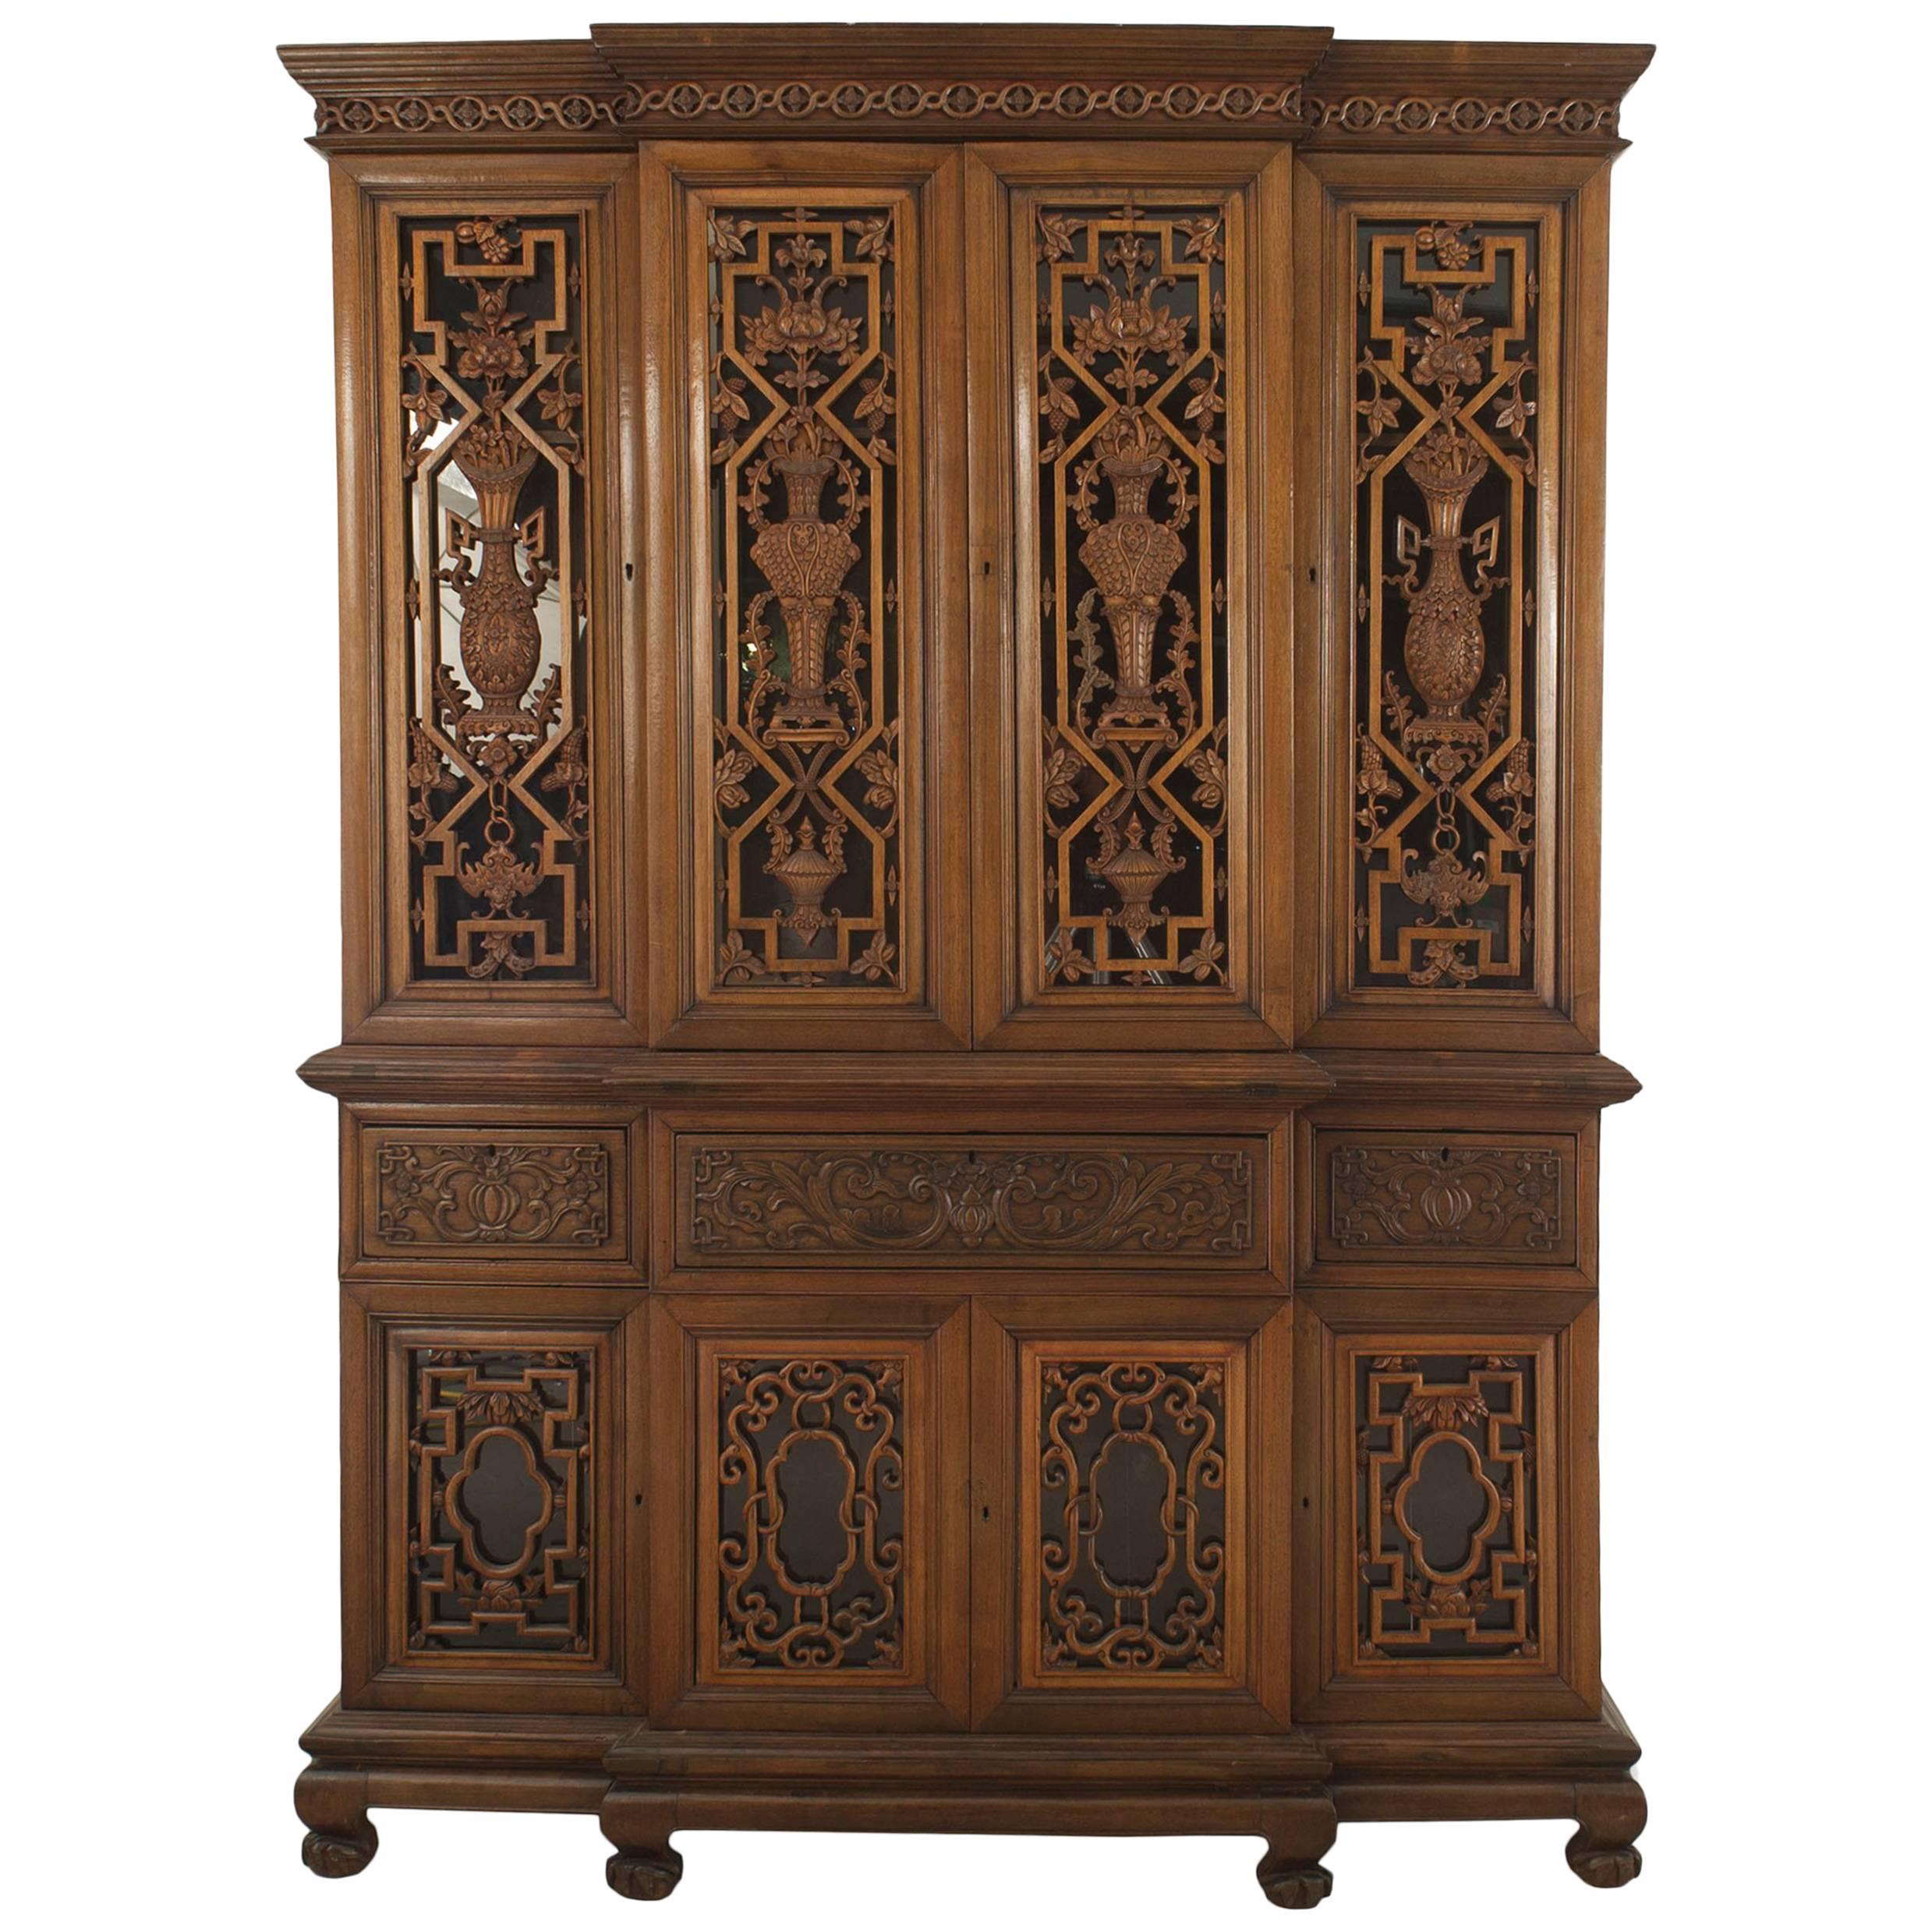 Anglo-Indian Carved Teakwood Breakfront Cabinet